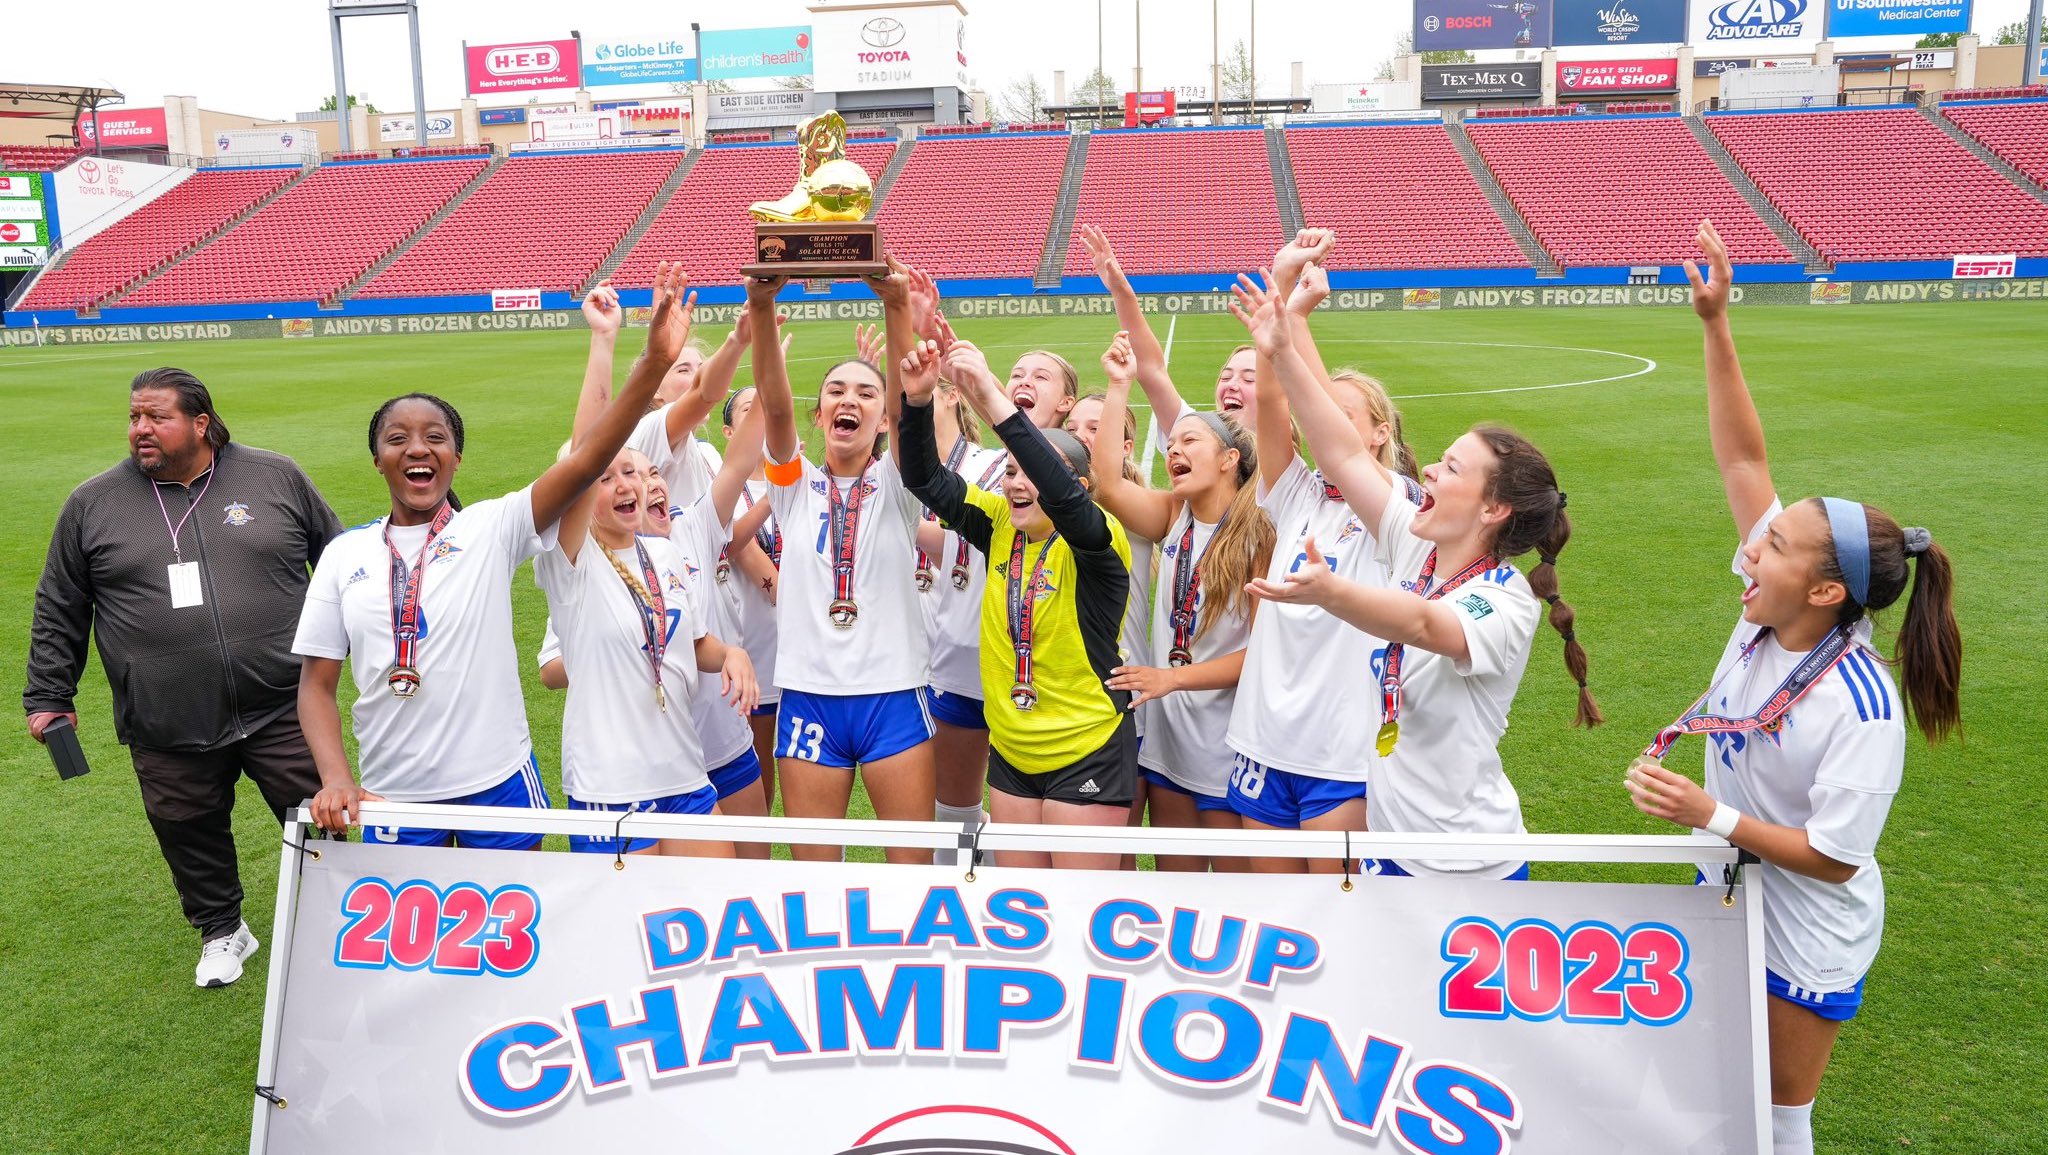 Four teams capture 2023 Dallas Cup Girls’ Invitational titles SoccerWire